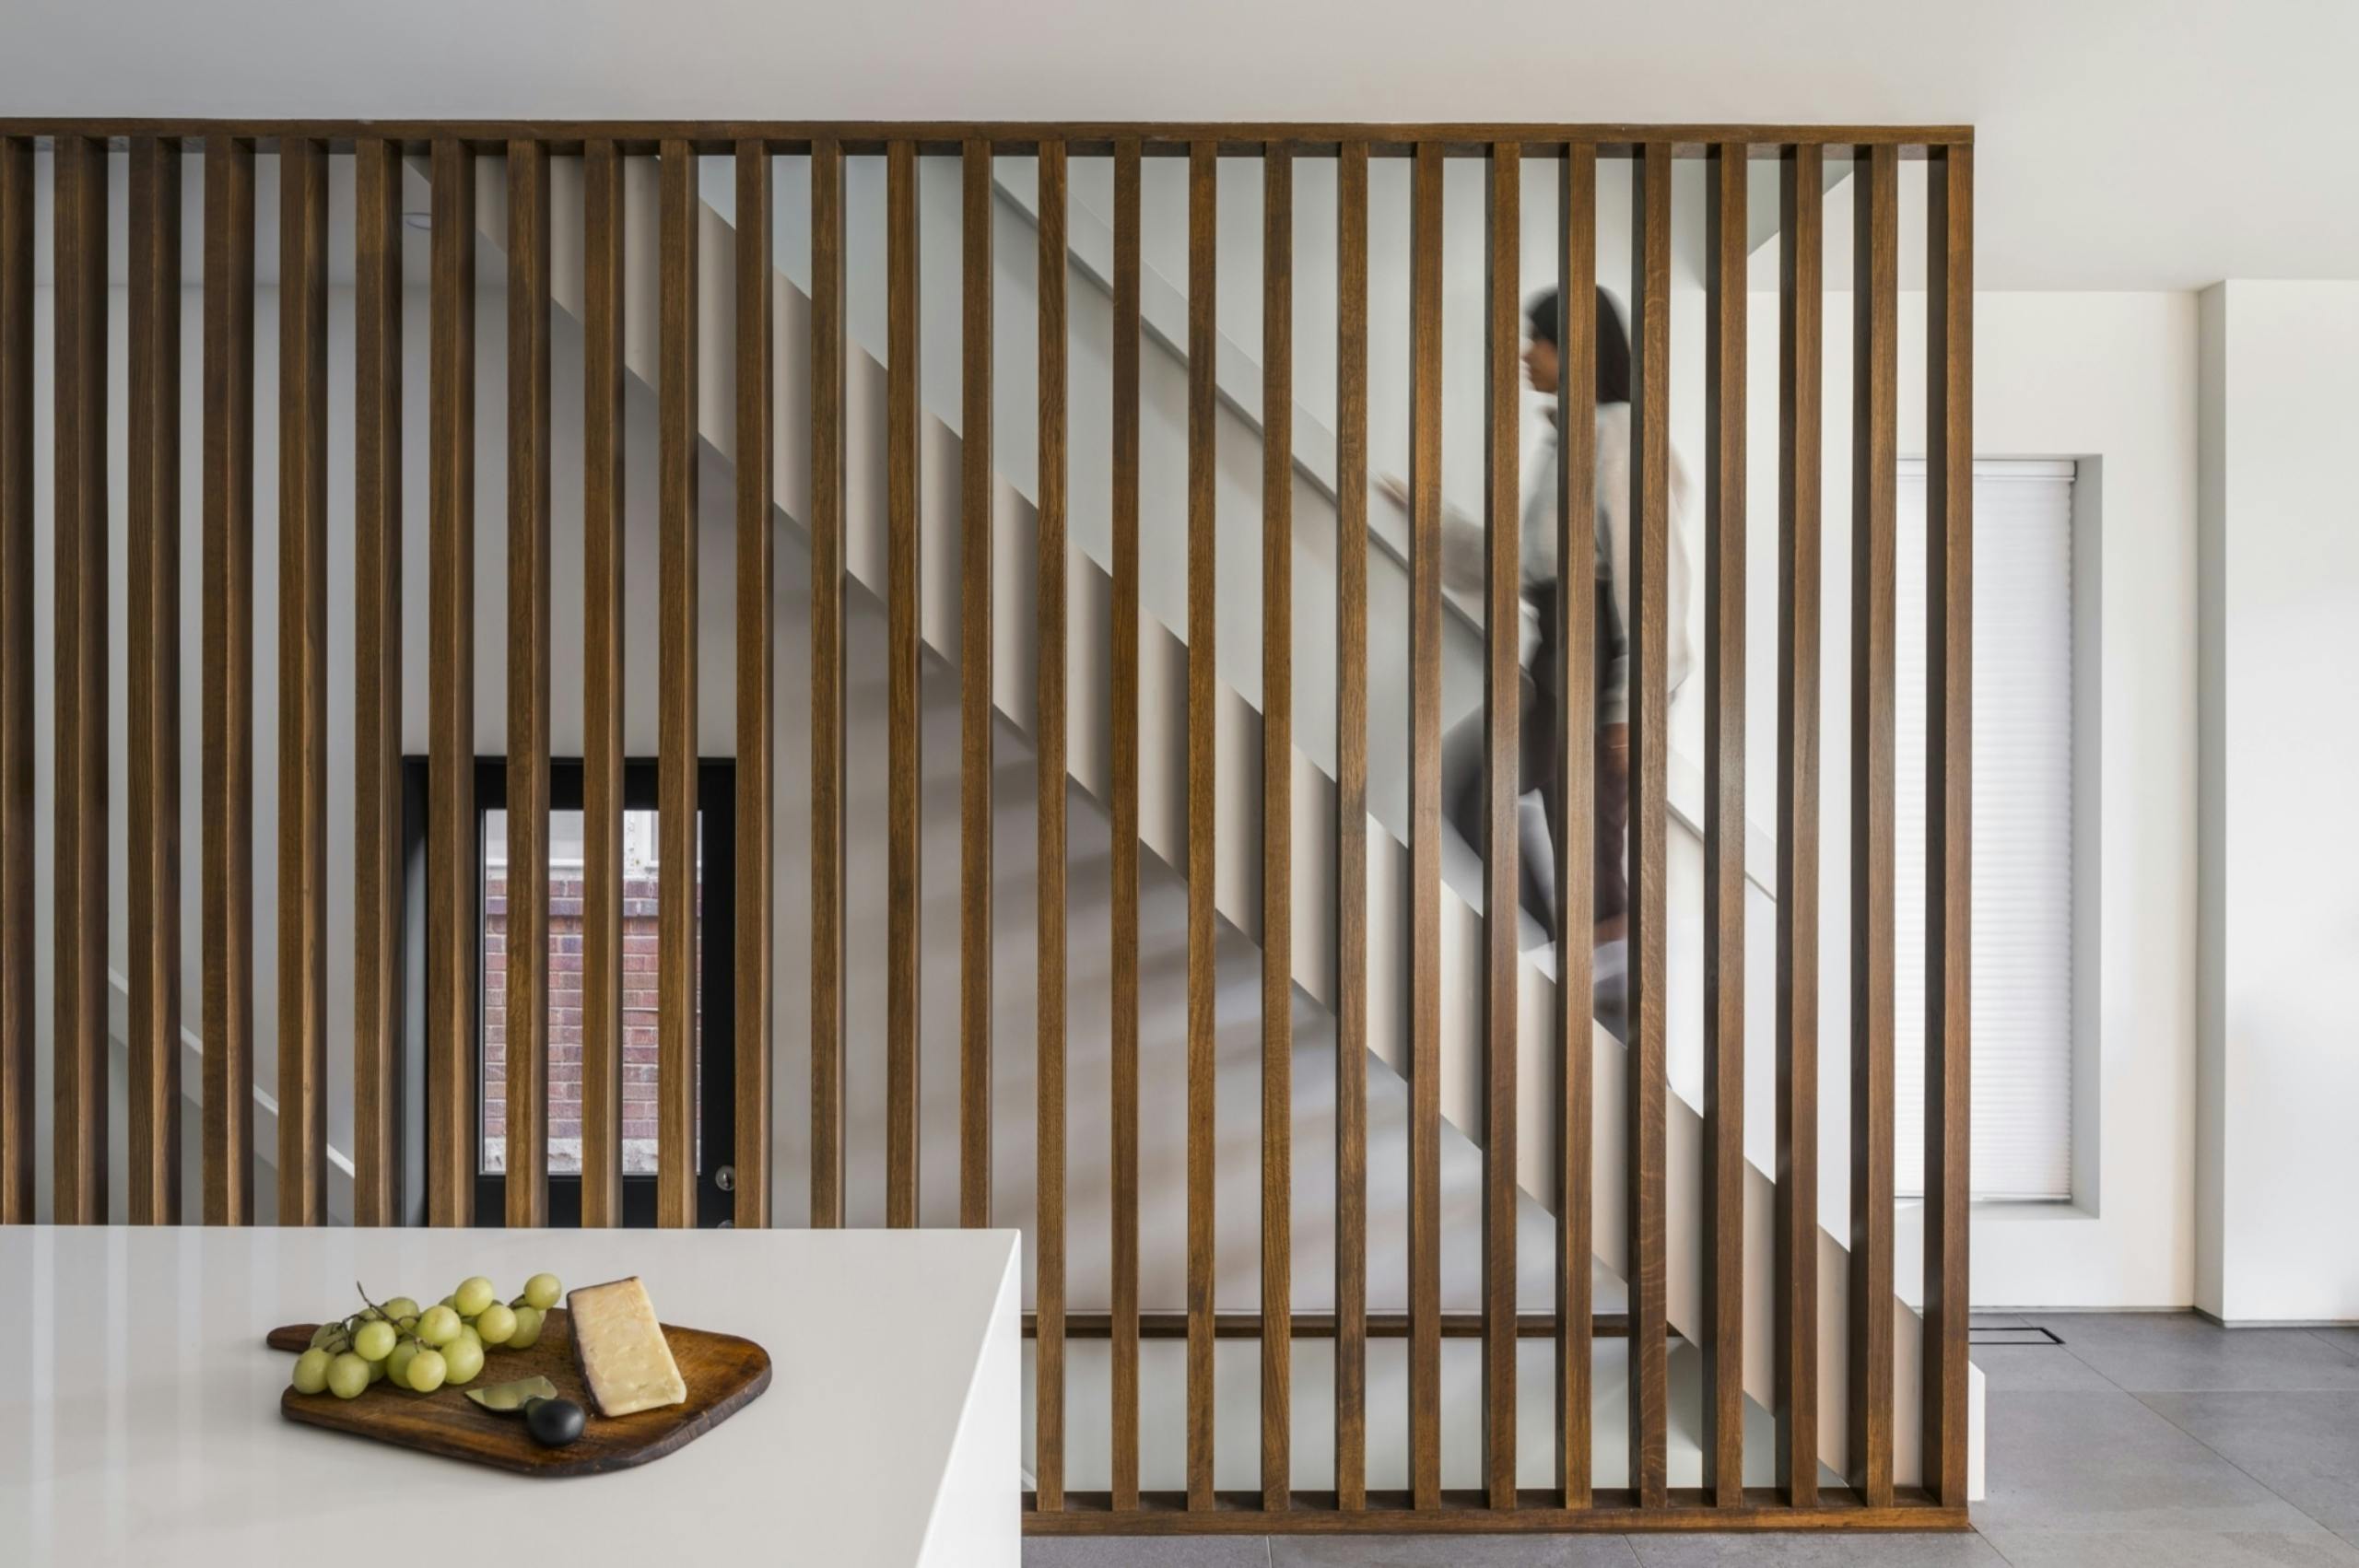 Wood slat wall screen acts as necessary guard for the stairs, but adds some design interest as a sculptural element